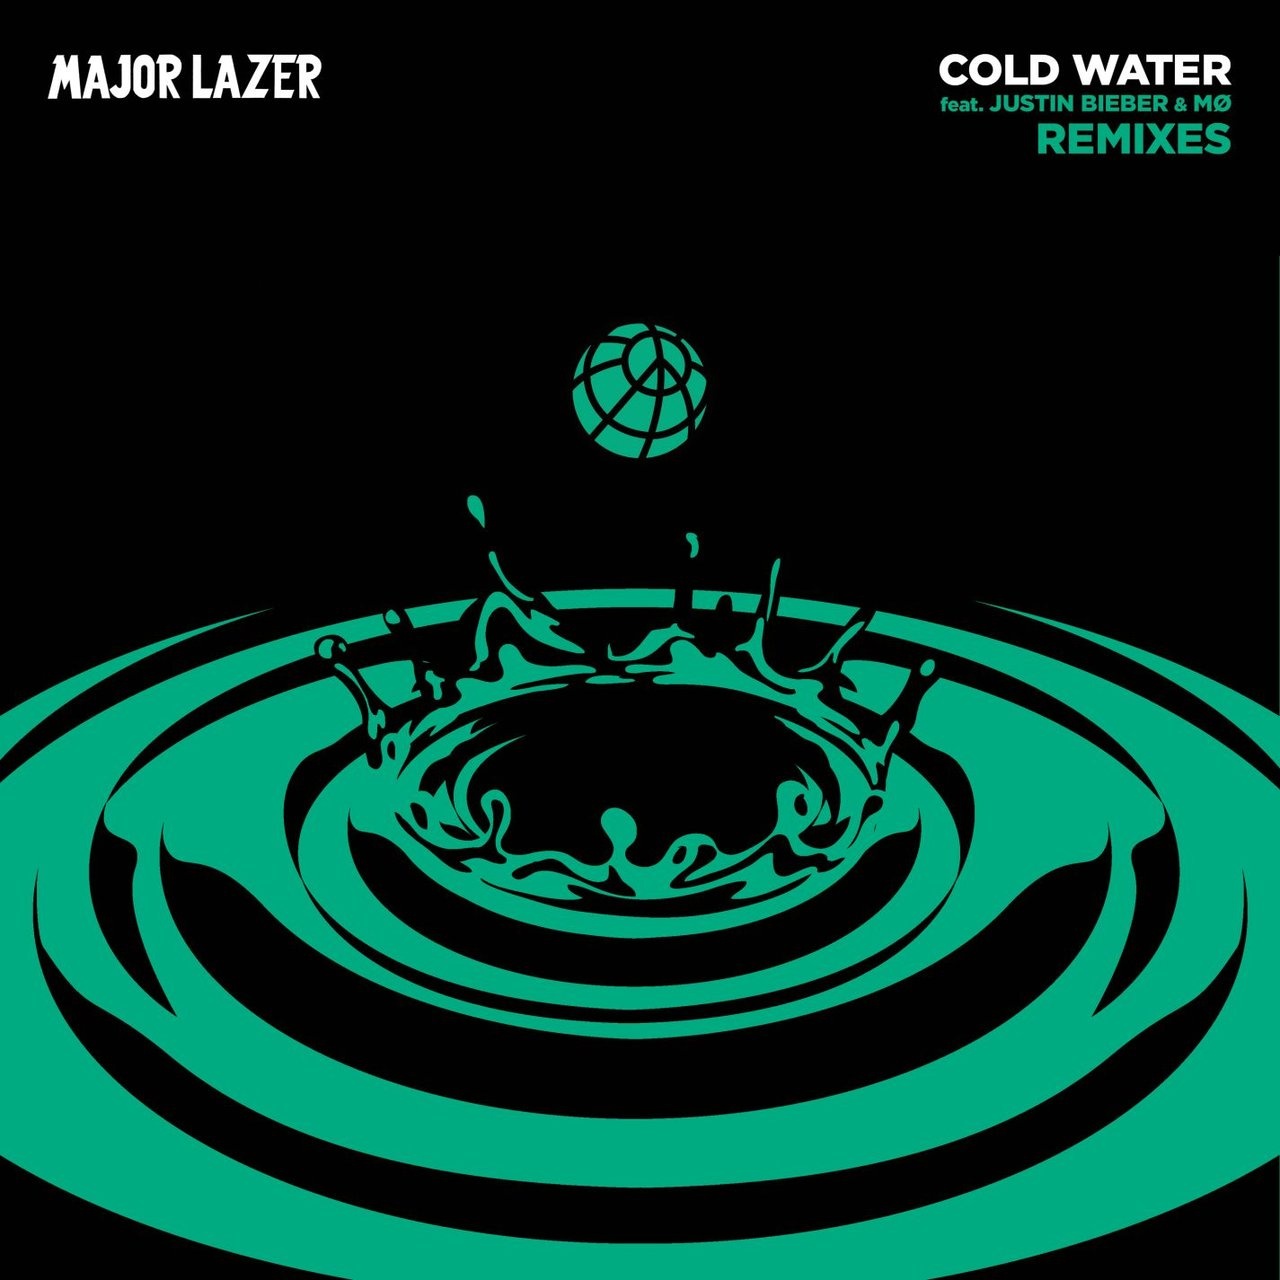 Cold Water (Lost Frequencies Remix) 